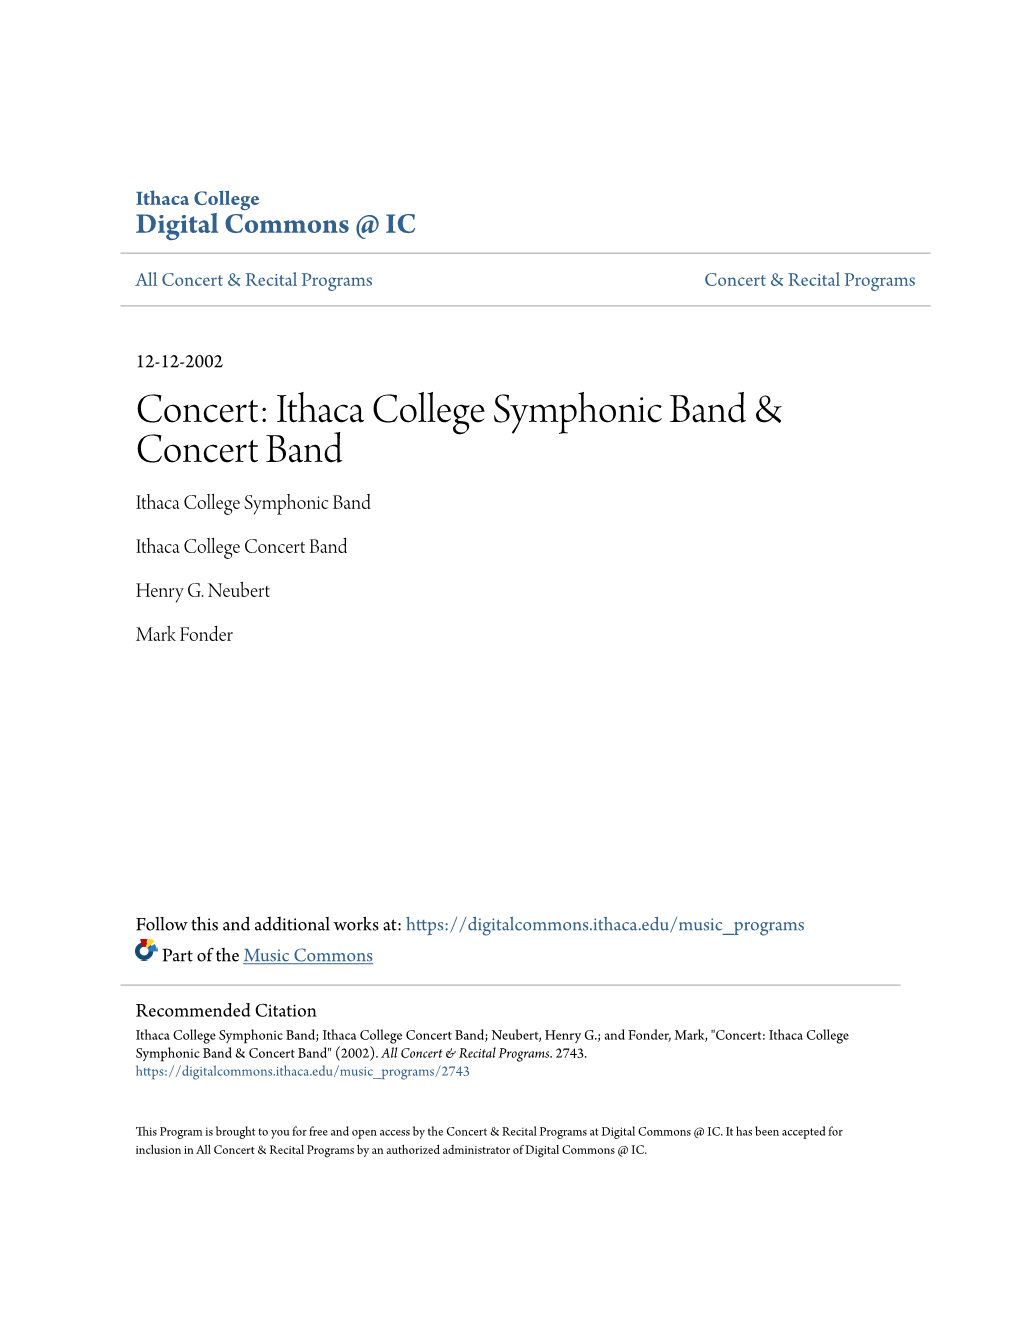 Ithaca College Symphonic Band & Concert Band